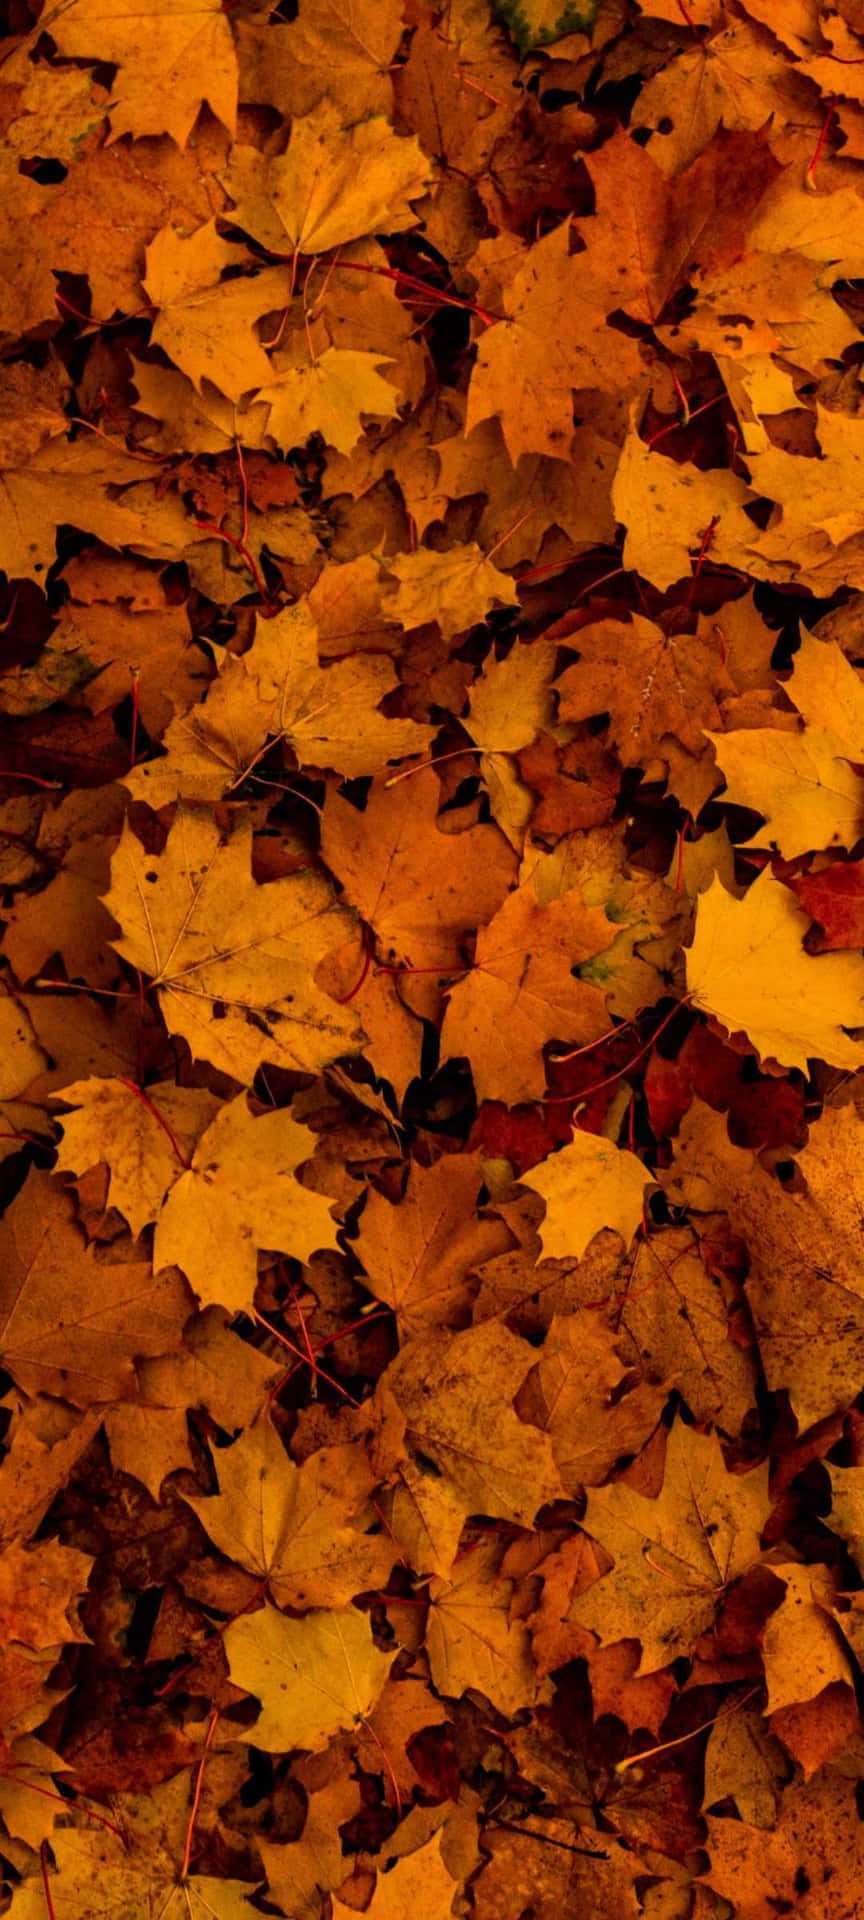 Enjoy the beauty of nature with Autumn Leaves Phone Wallpaper